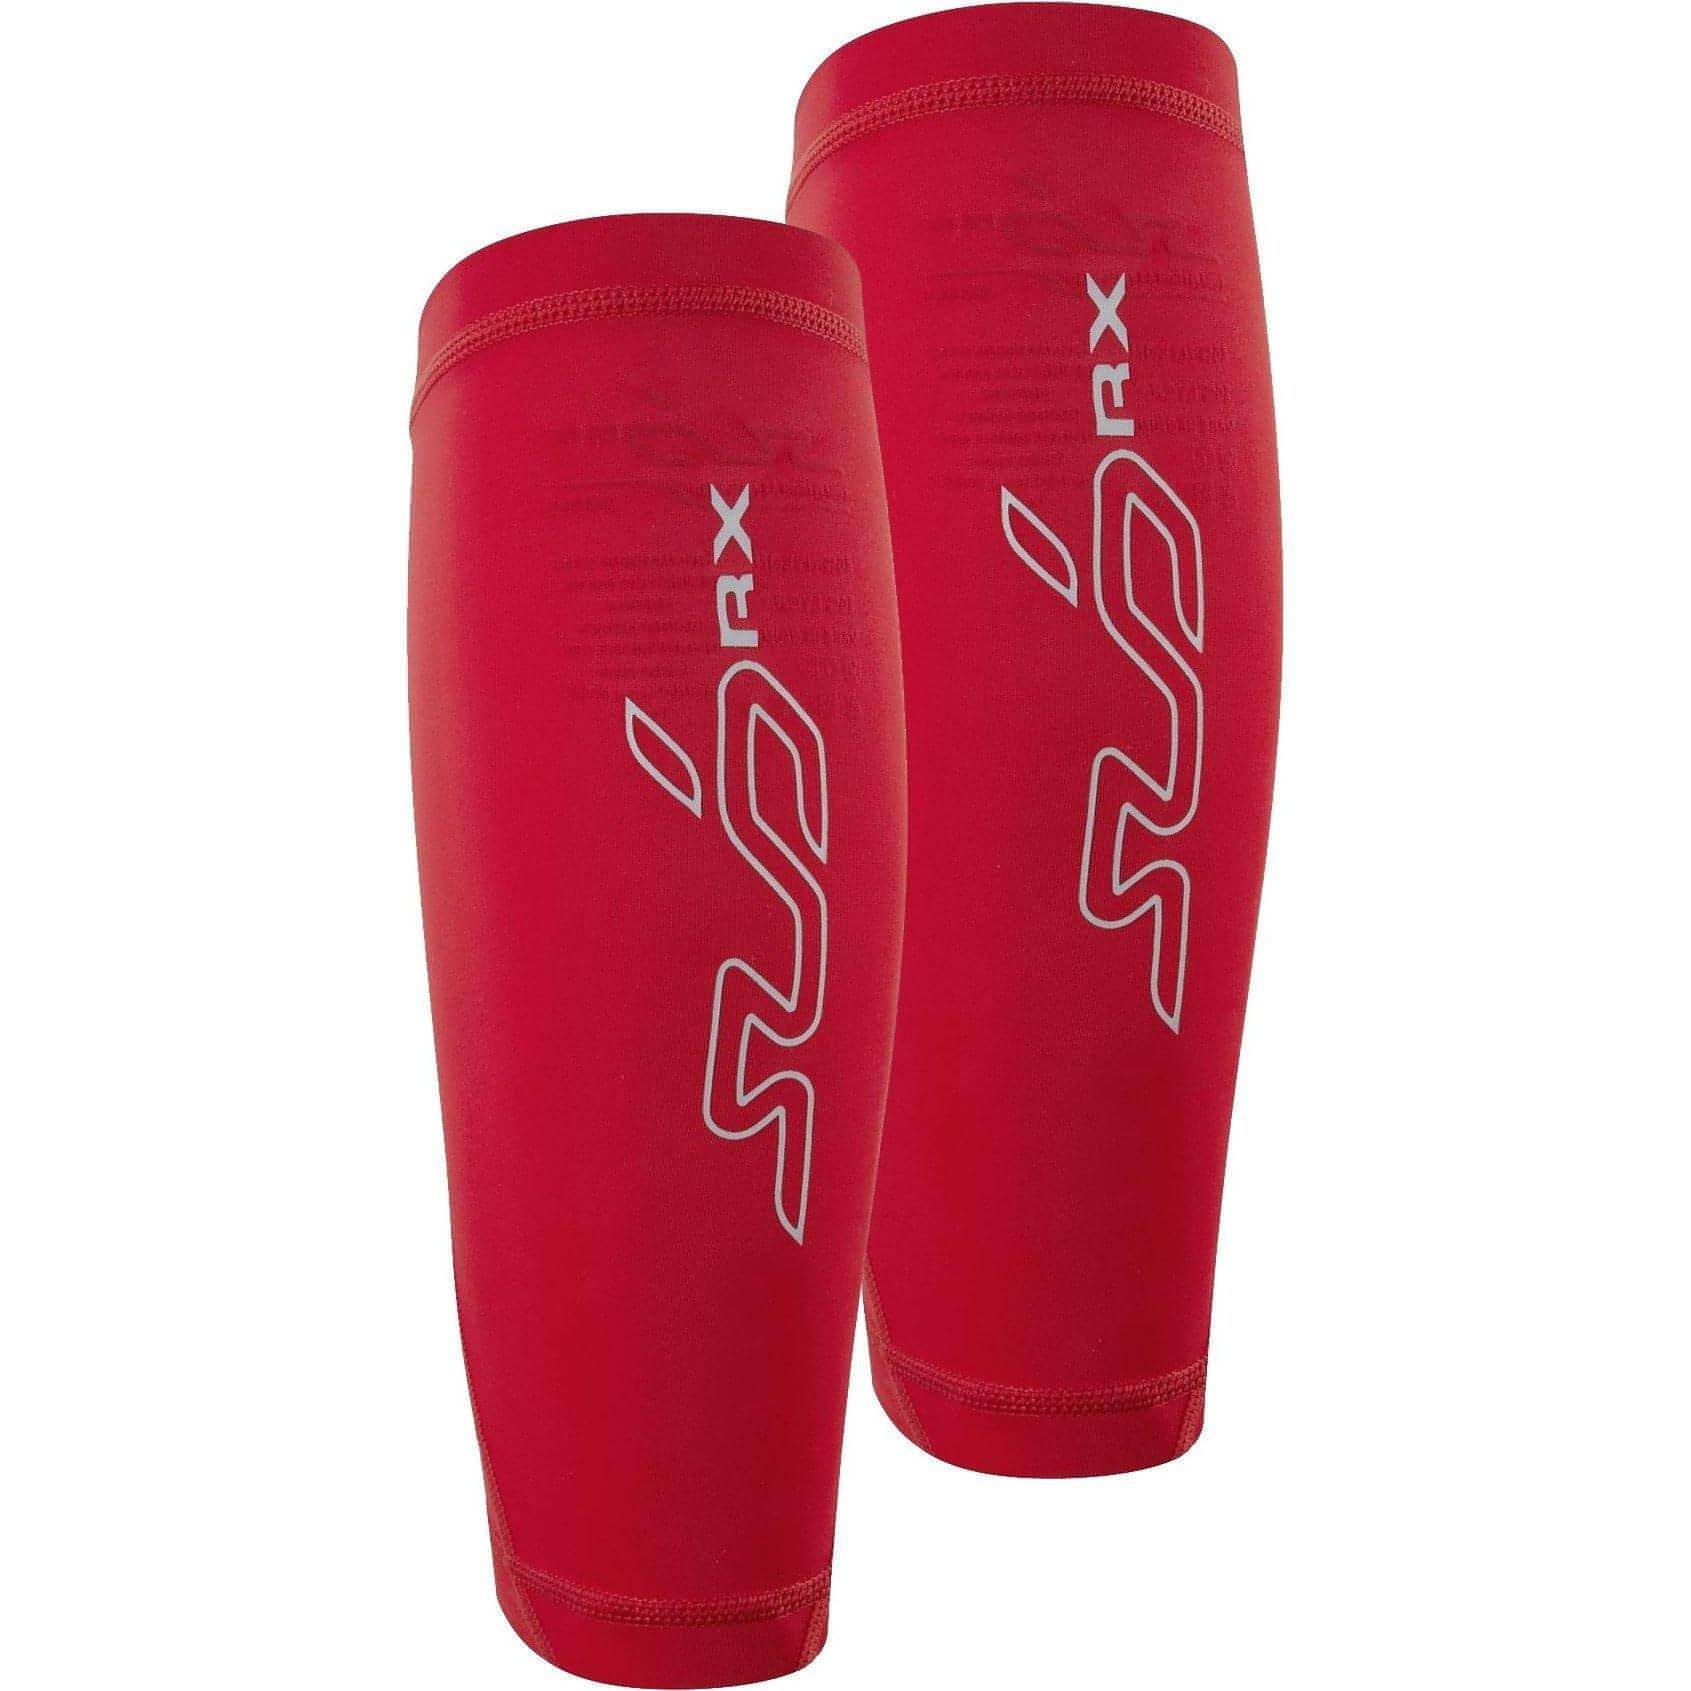 Sub Sports Elite RX Womens Compression Calf Guards - Red 5055751112606 - Start Fitness